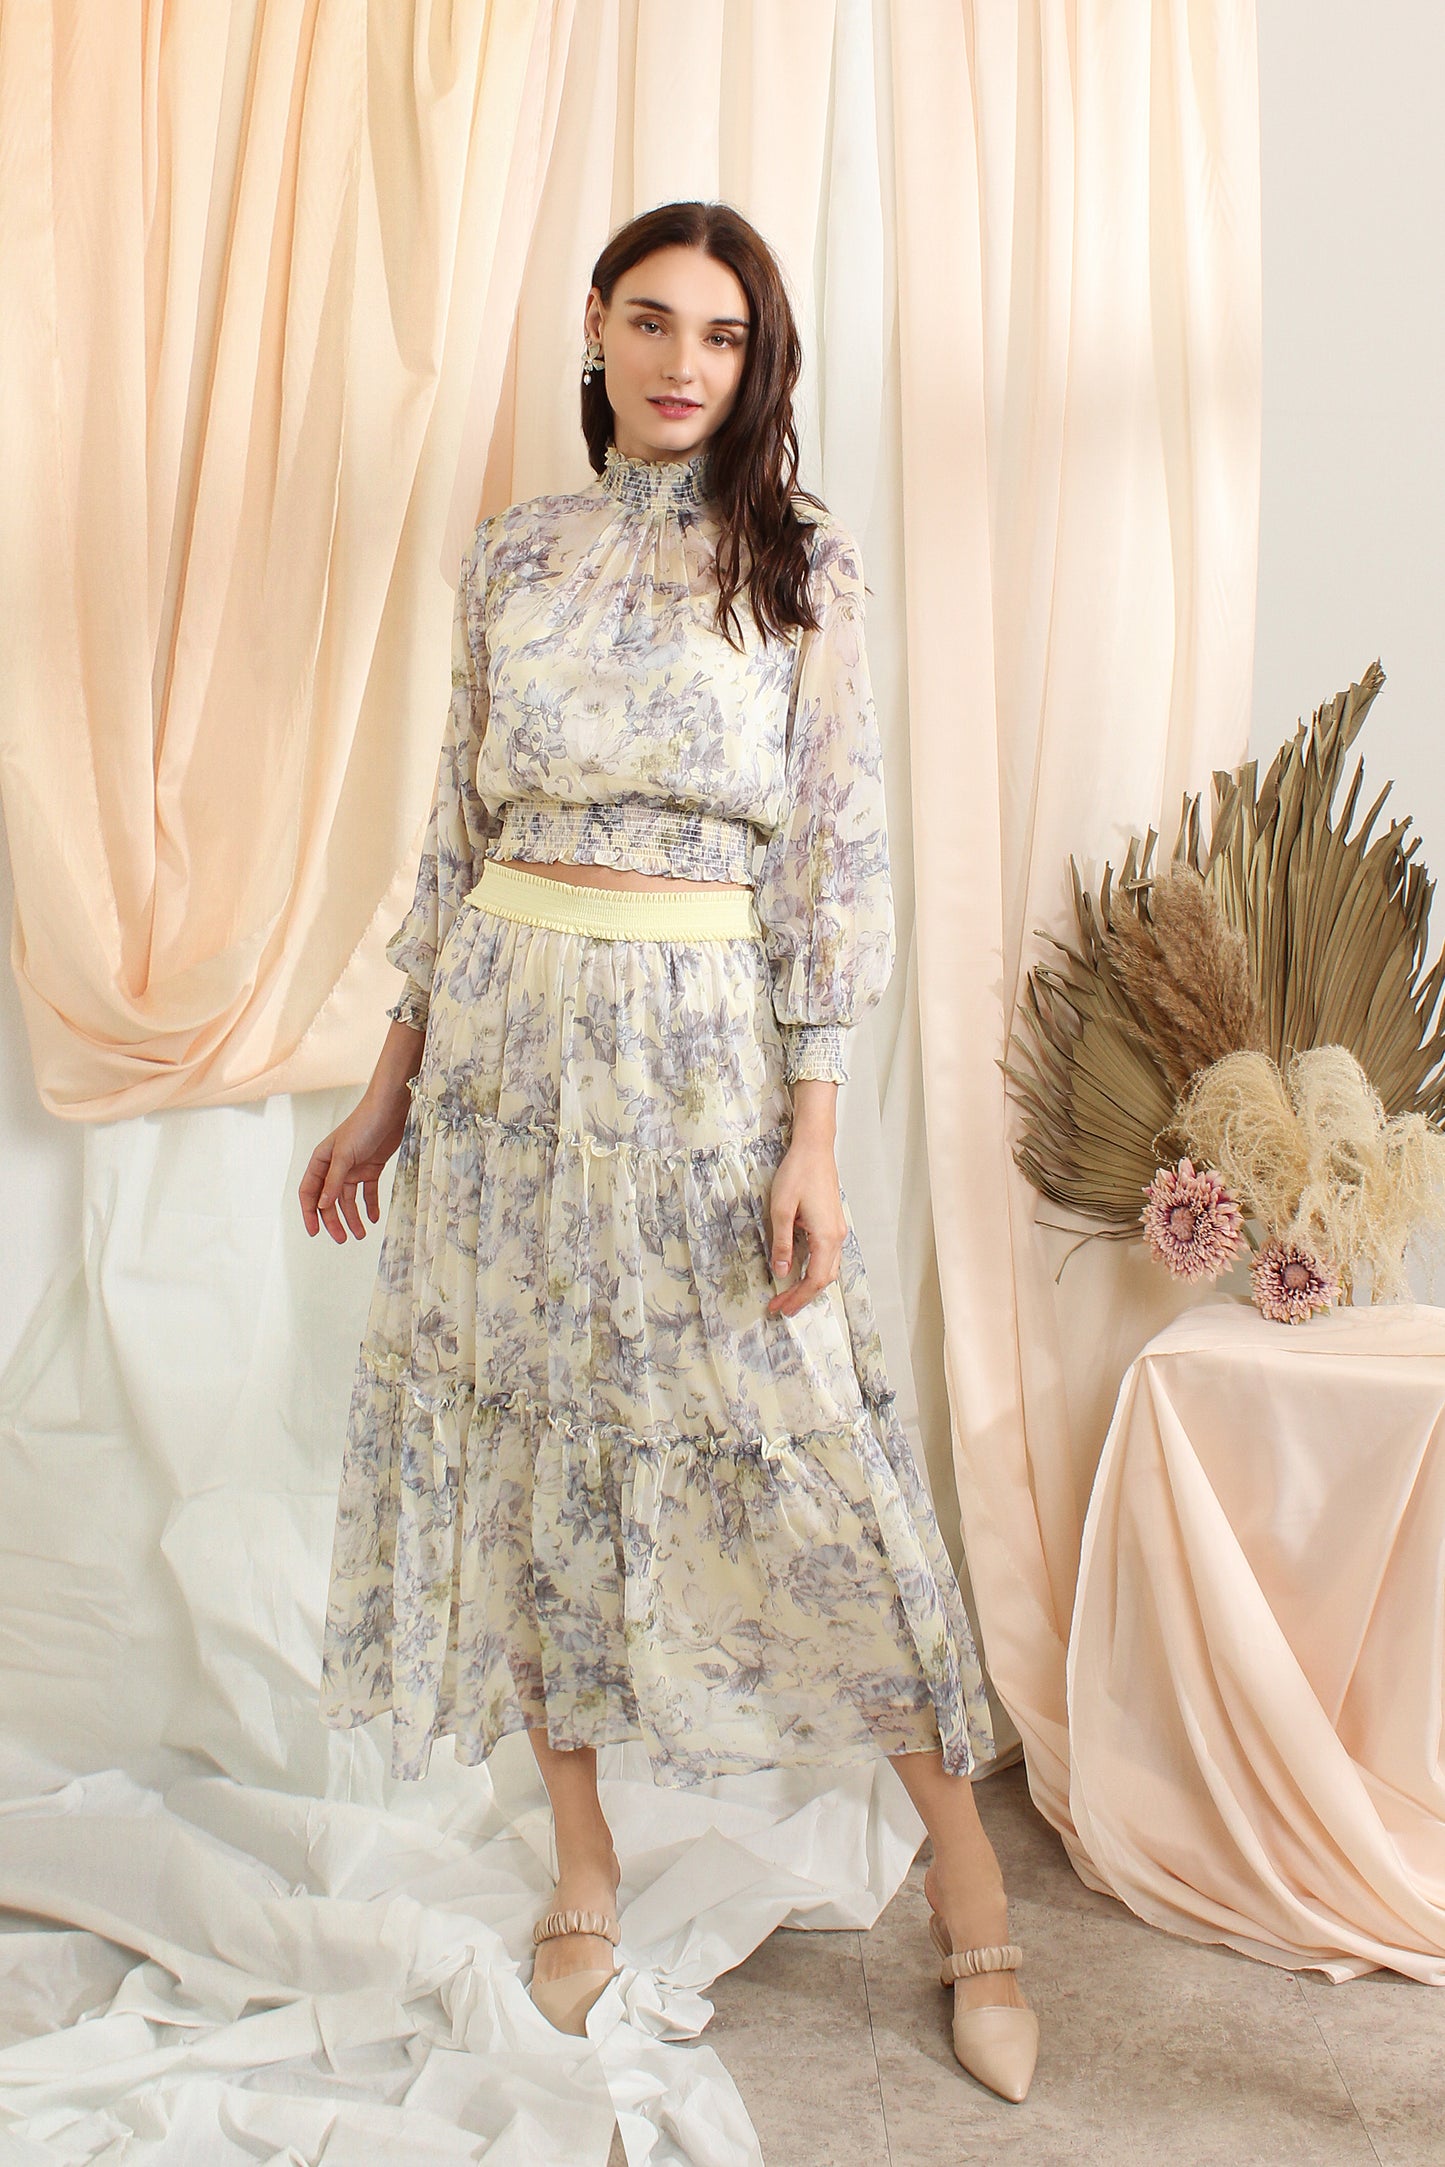 Ruffle Chiffon Sets With Floral Prints